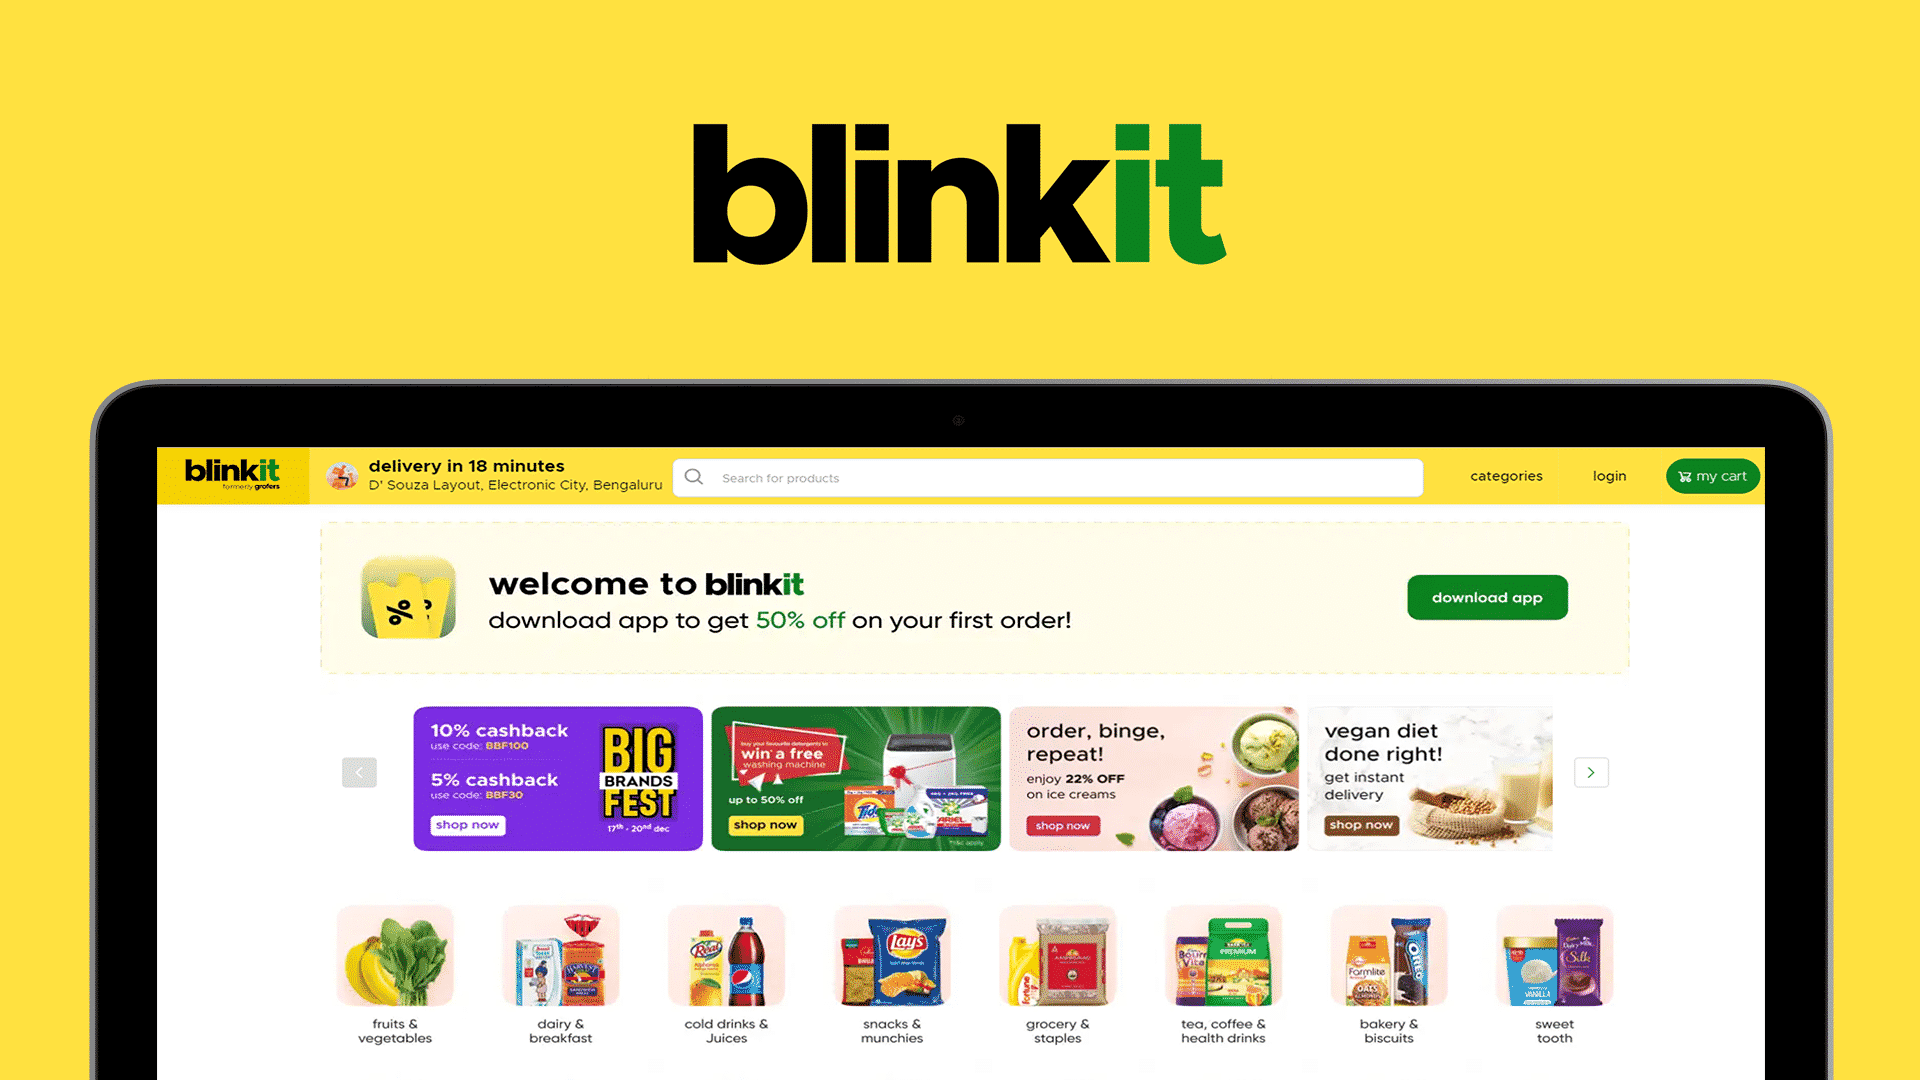 The Latest Brand Name Move from Grofers to Blinkit